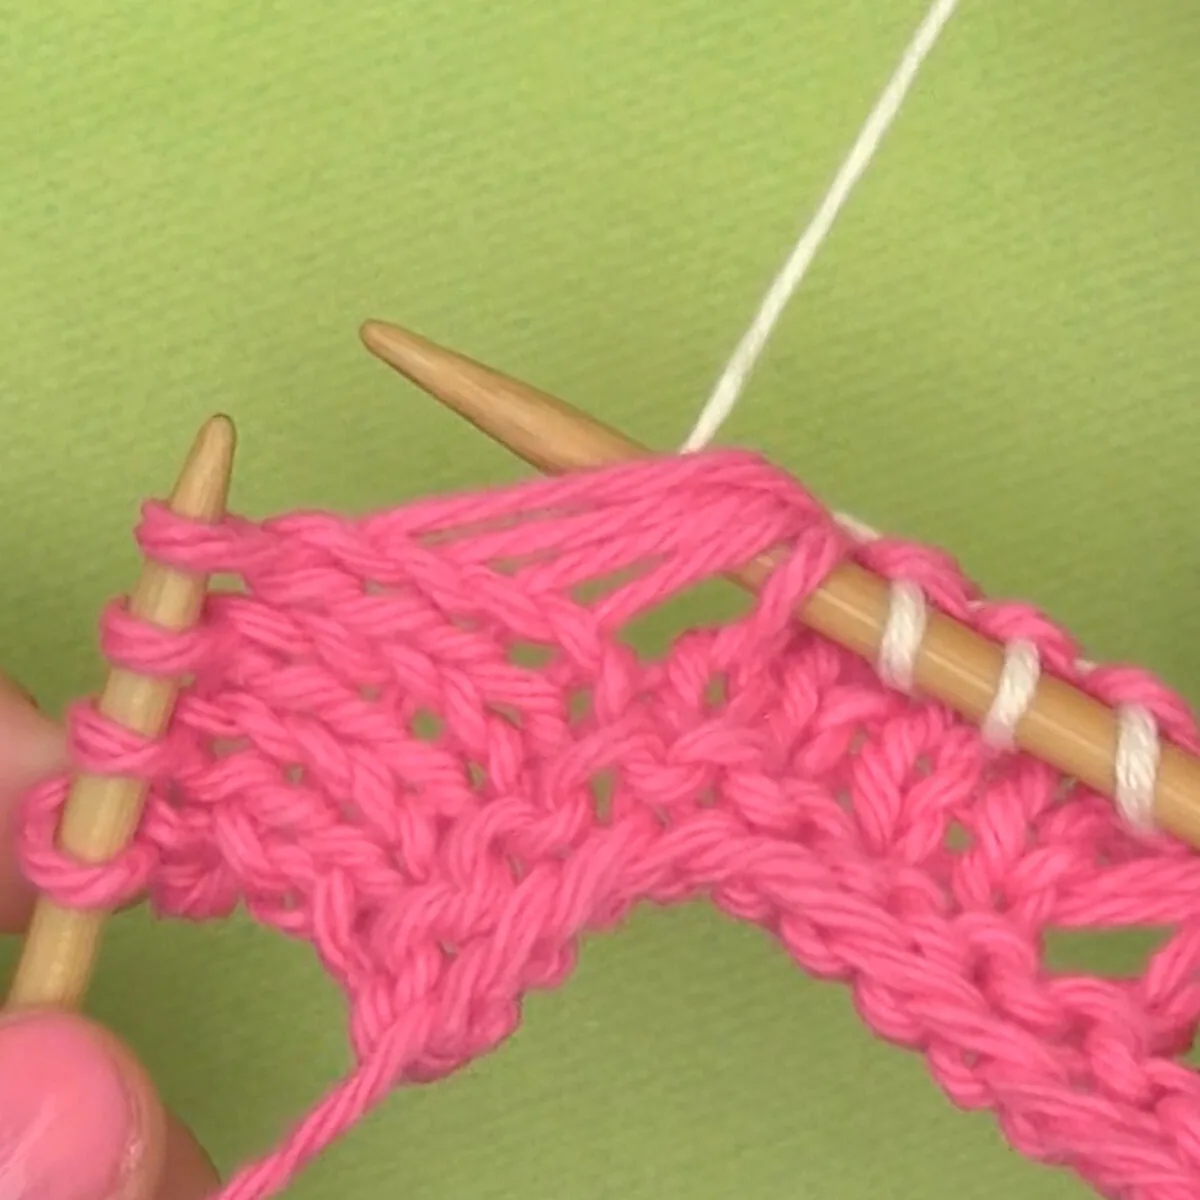 Pink yarn on knitting needle with white color yarn demonstrating Knit Below technique.